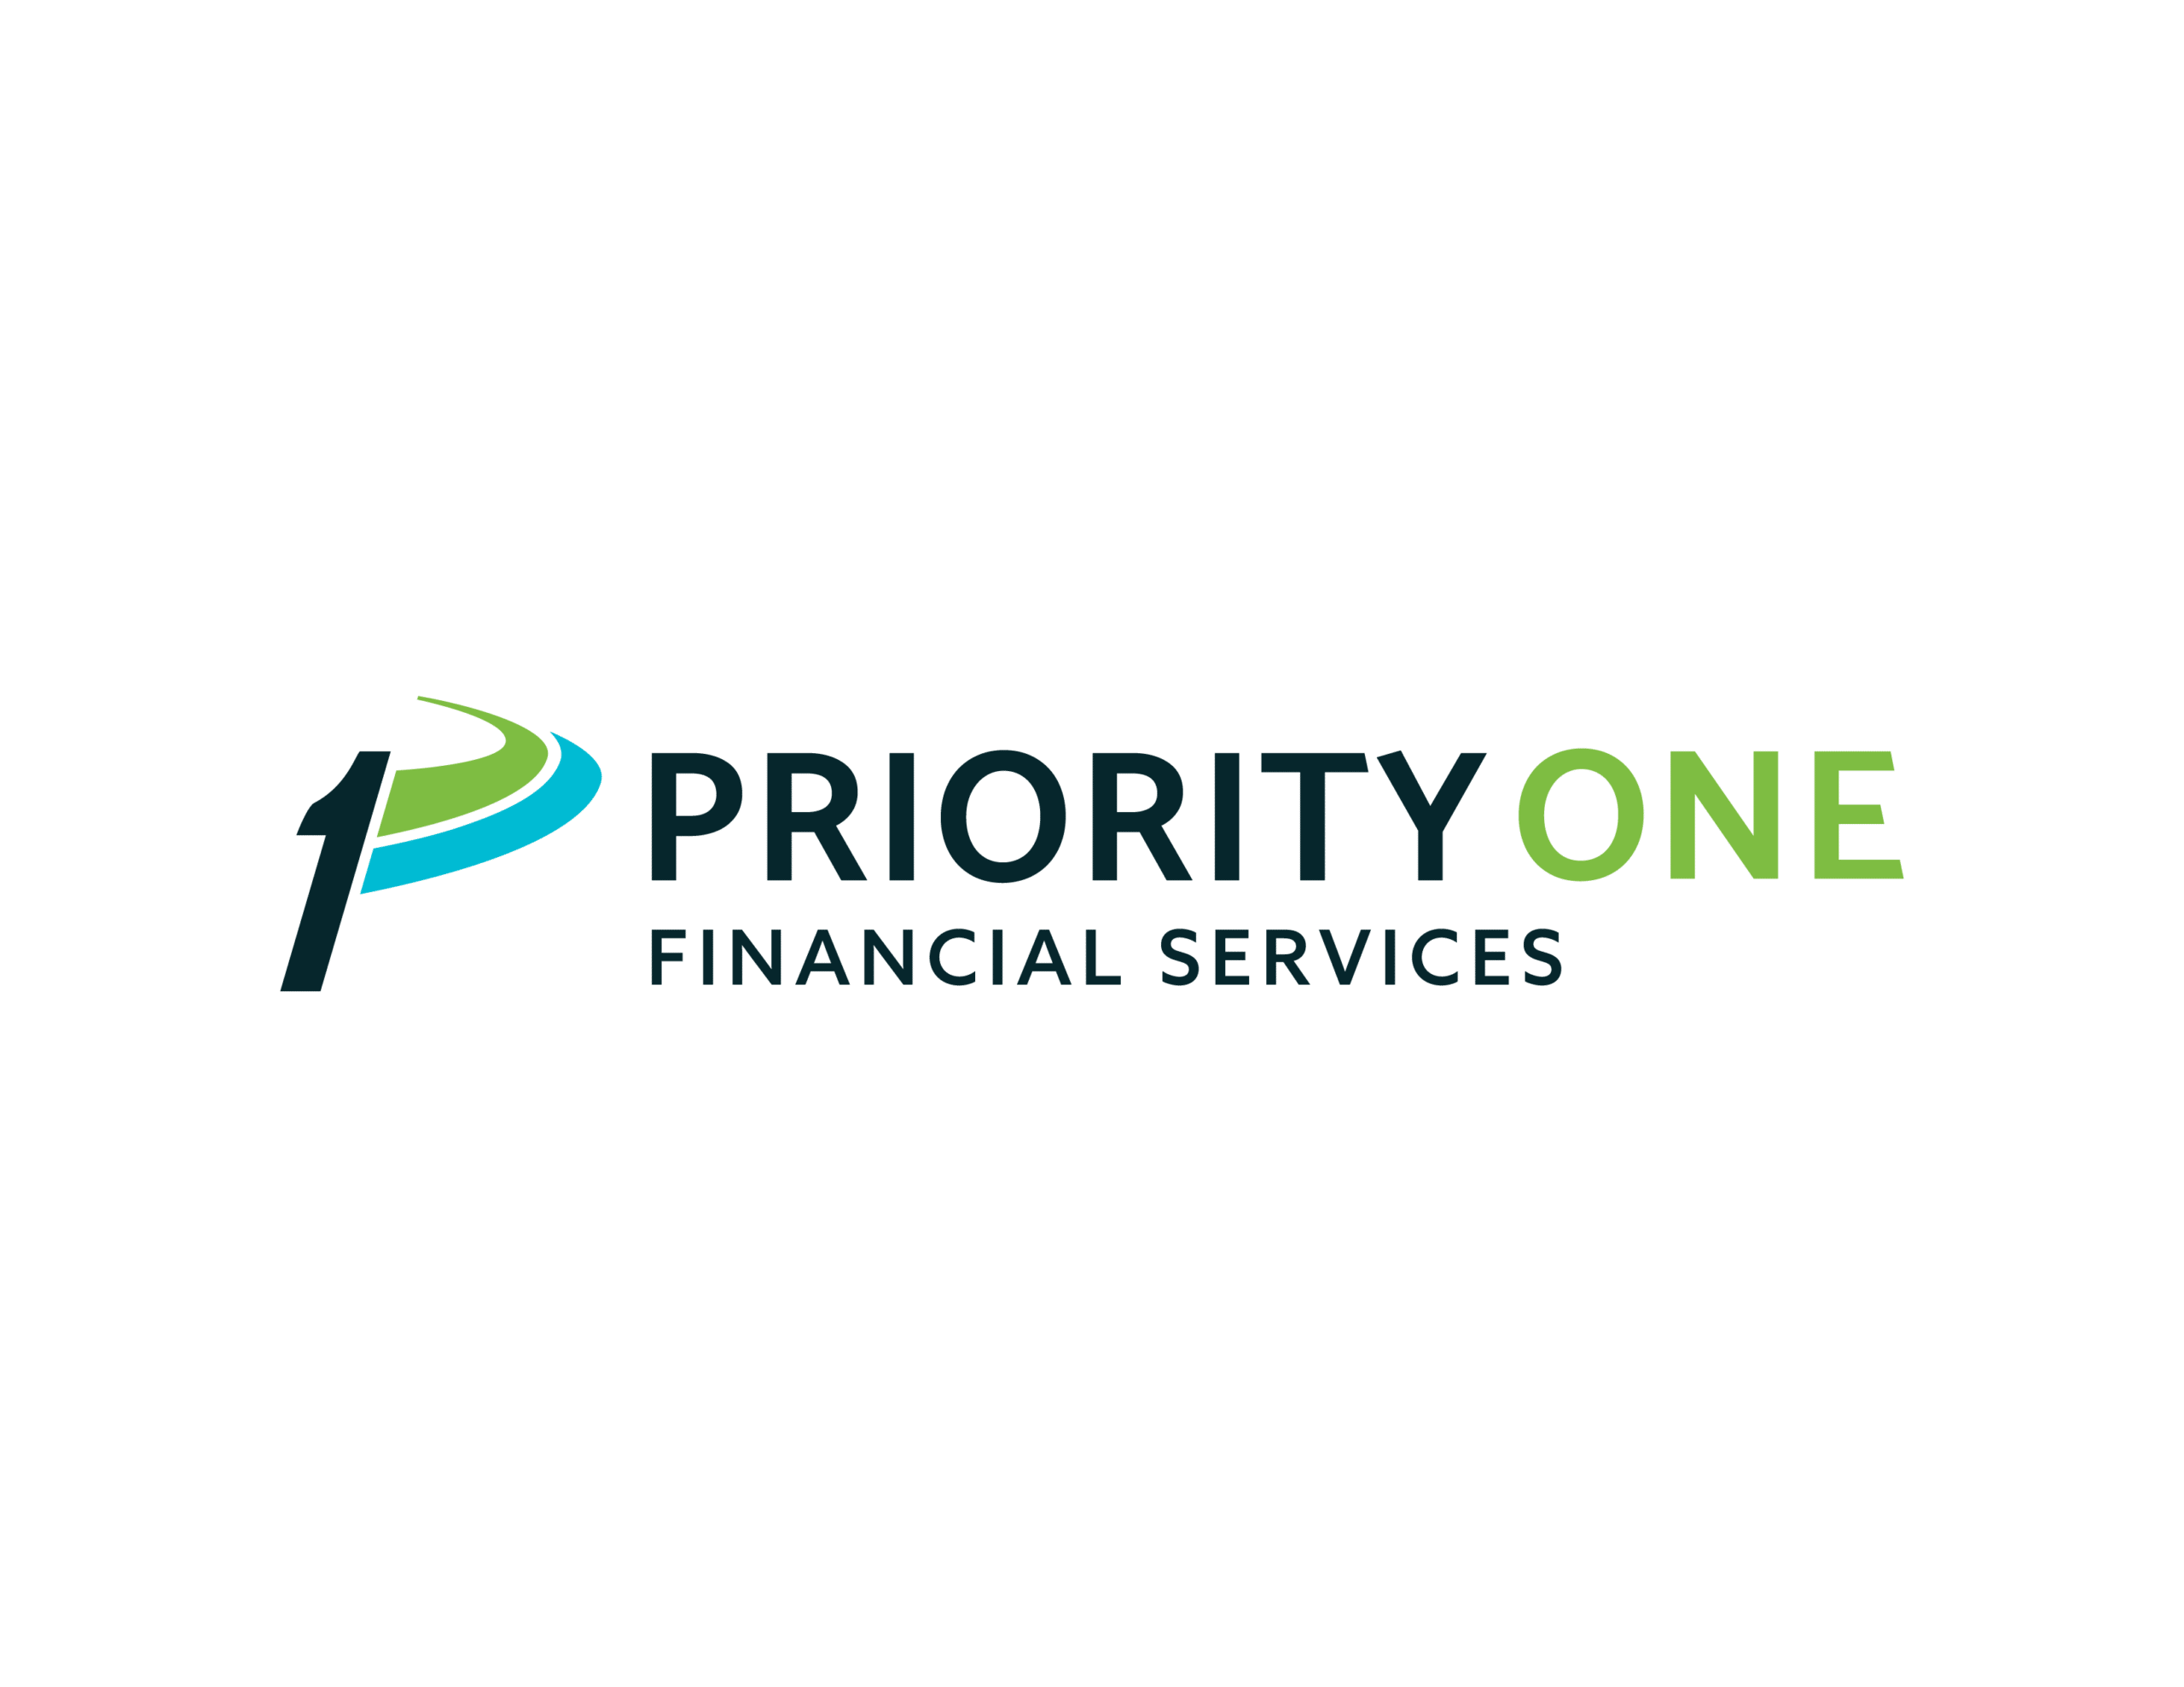 Priority One Financial Services